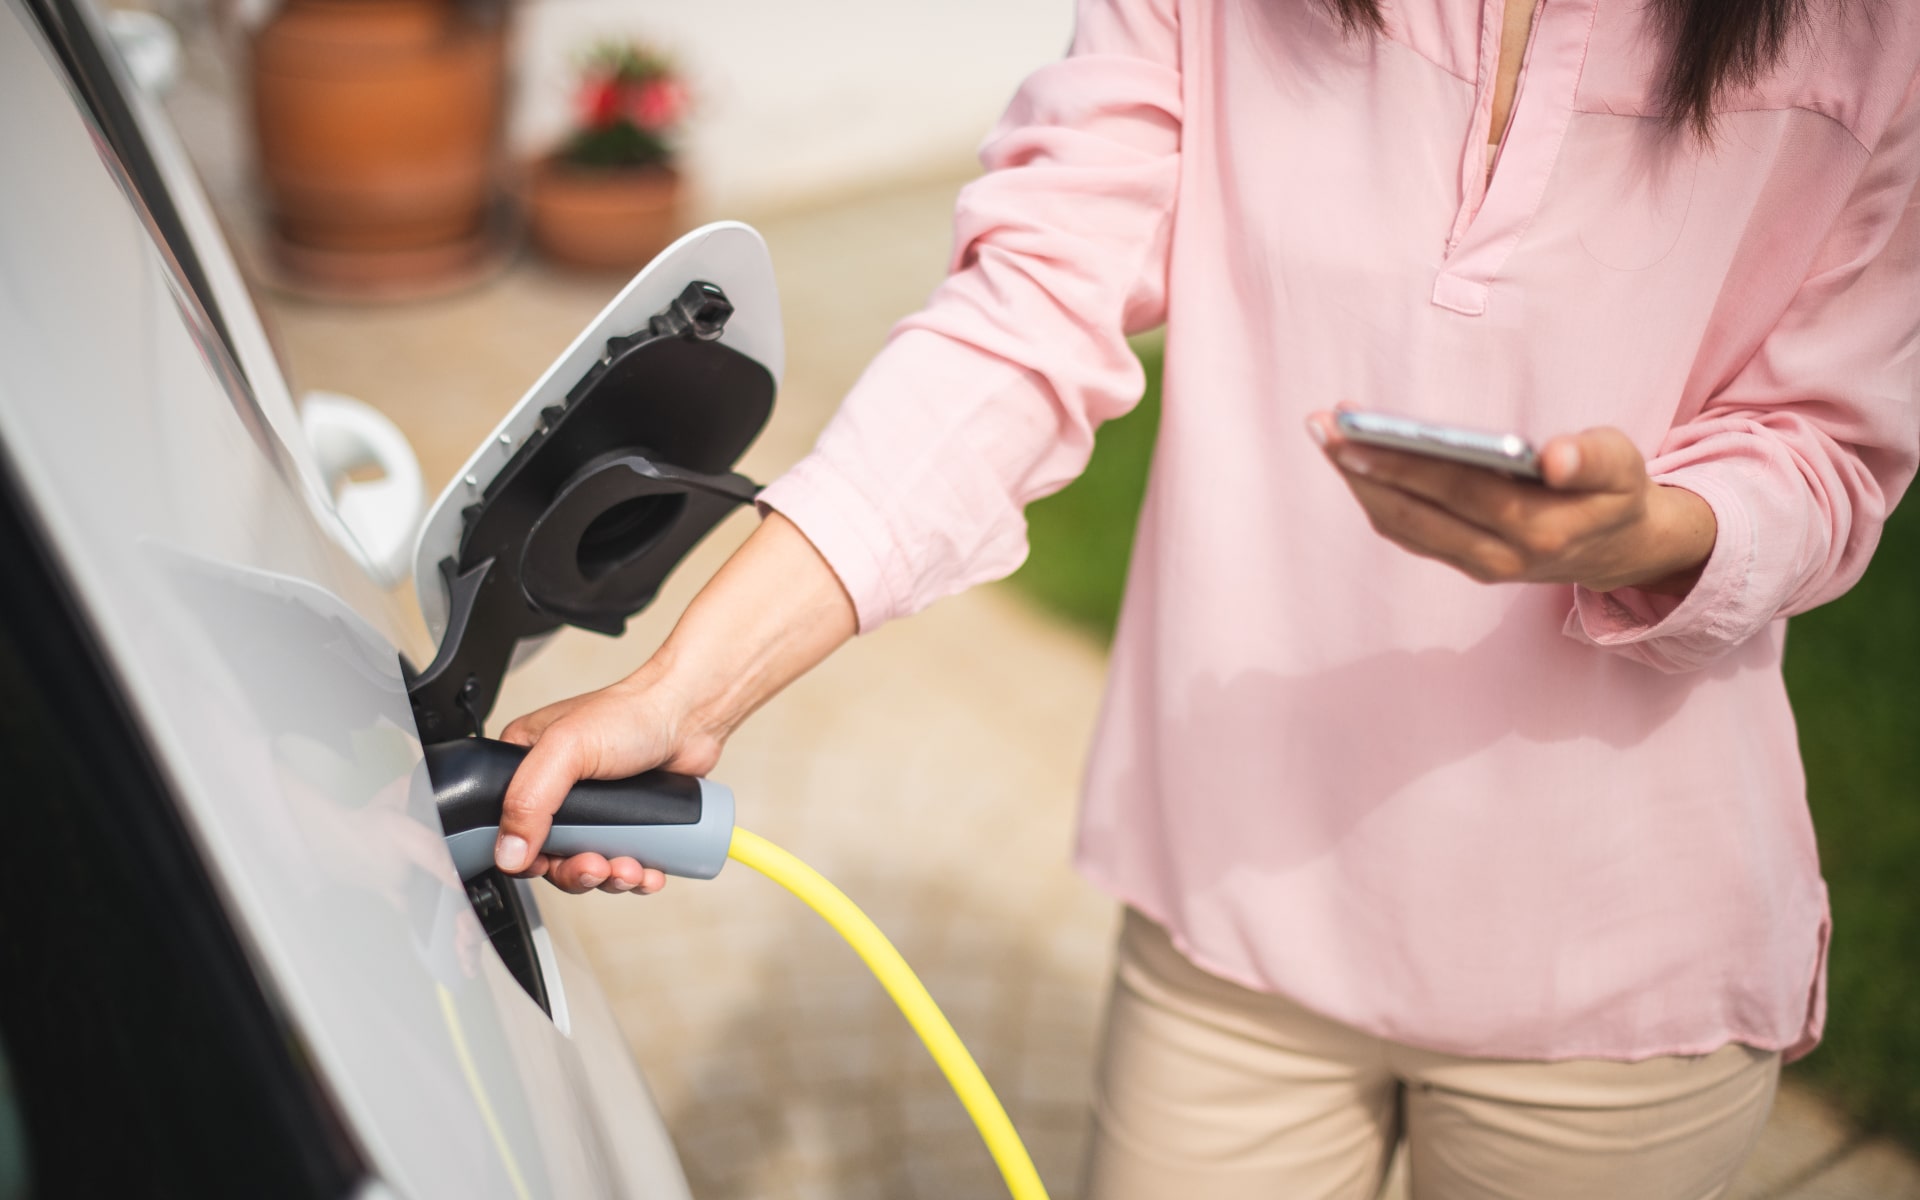 How Long Does It Take to Charge an EV at Home?